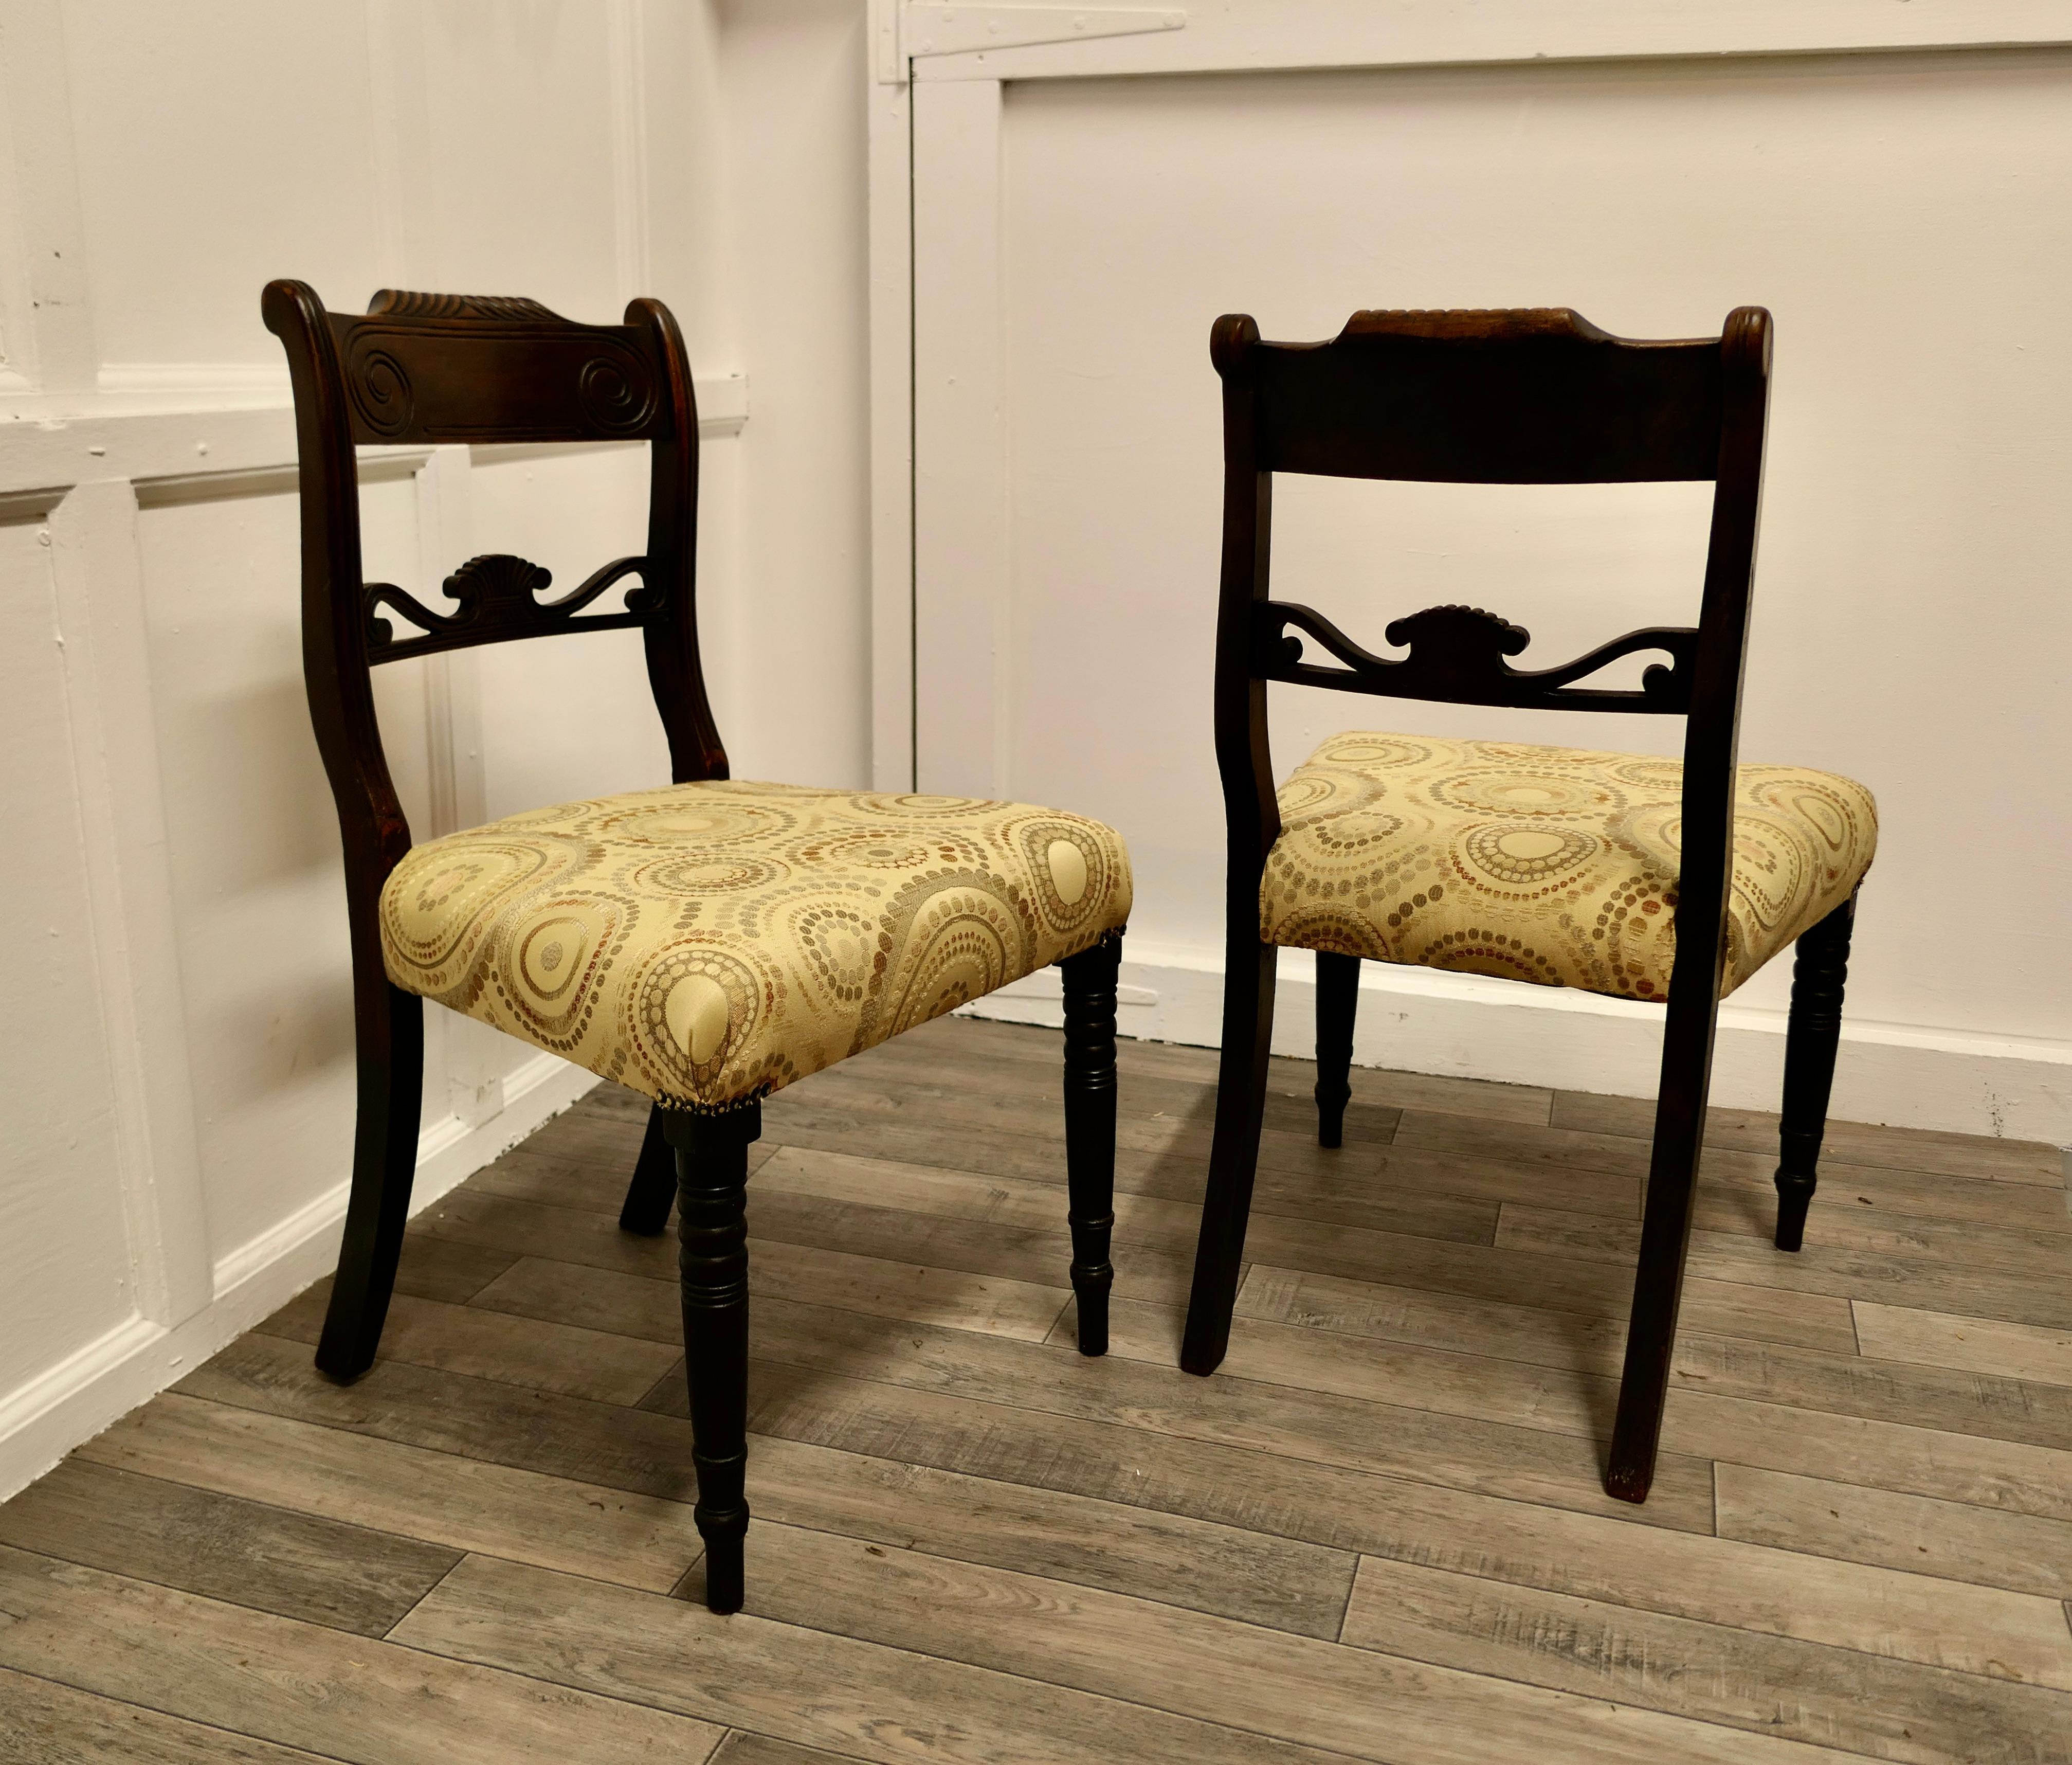 2 Lovely Regency chairs with new Upholstered seats 
 
A very attractive pair of chairs, they have a broad carved back top rail and a carved centre rail
The chairs have slender turned legs and the seats have new Silk upholstery in tones of cream